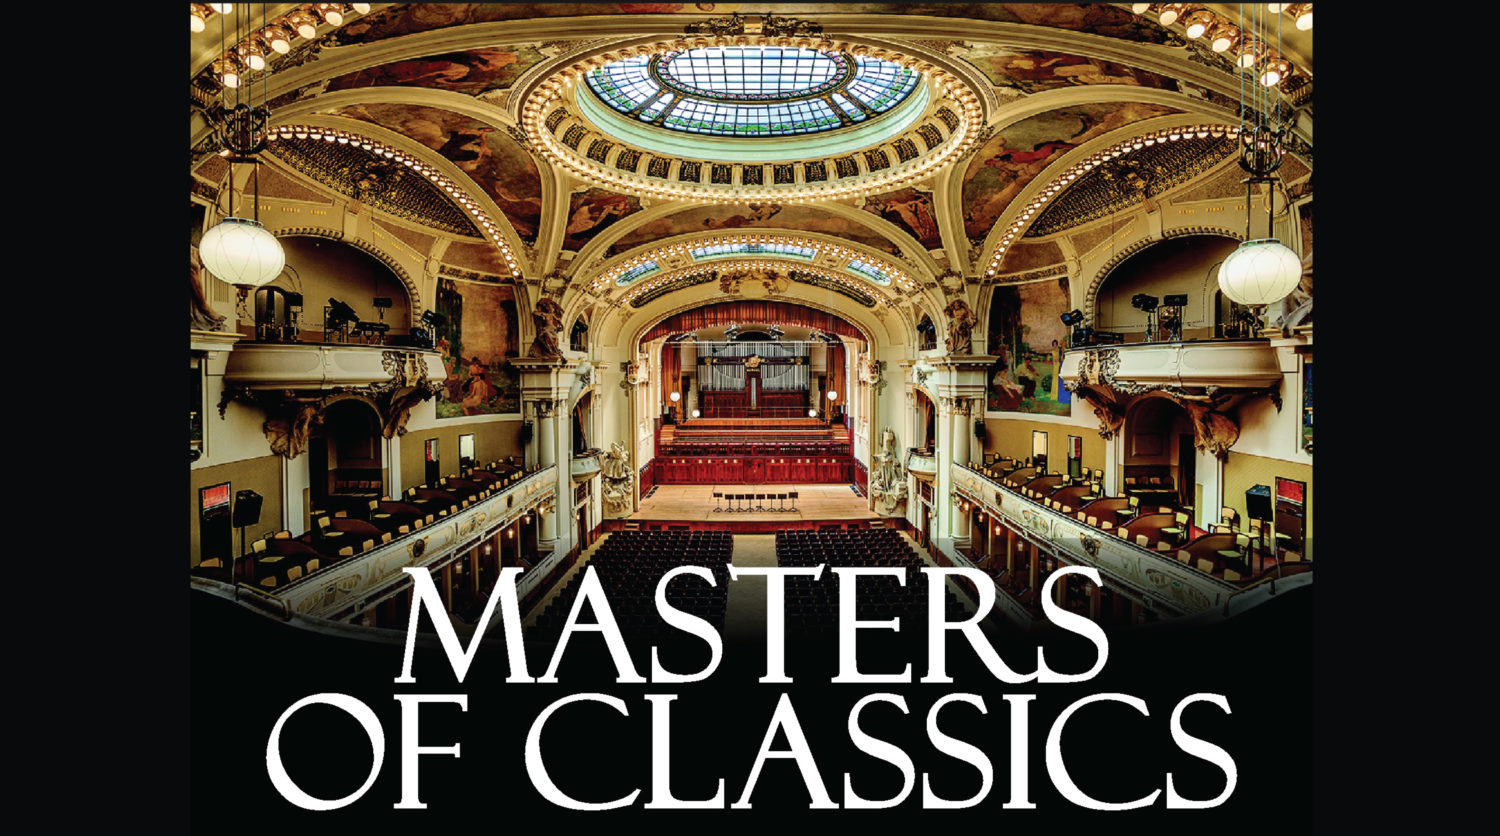 MASTERS OF CLASSICS IN THE MUNICIPAL HOUSE 16.04.2019